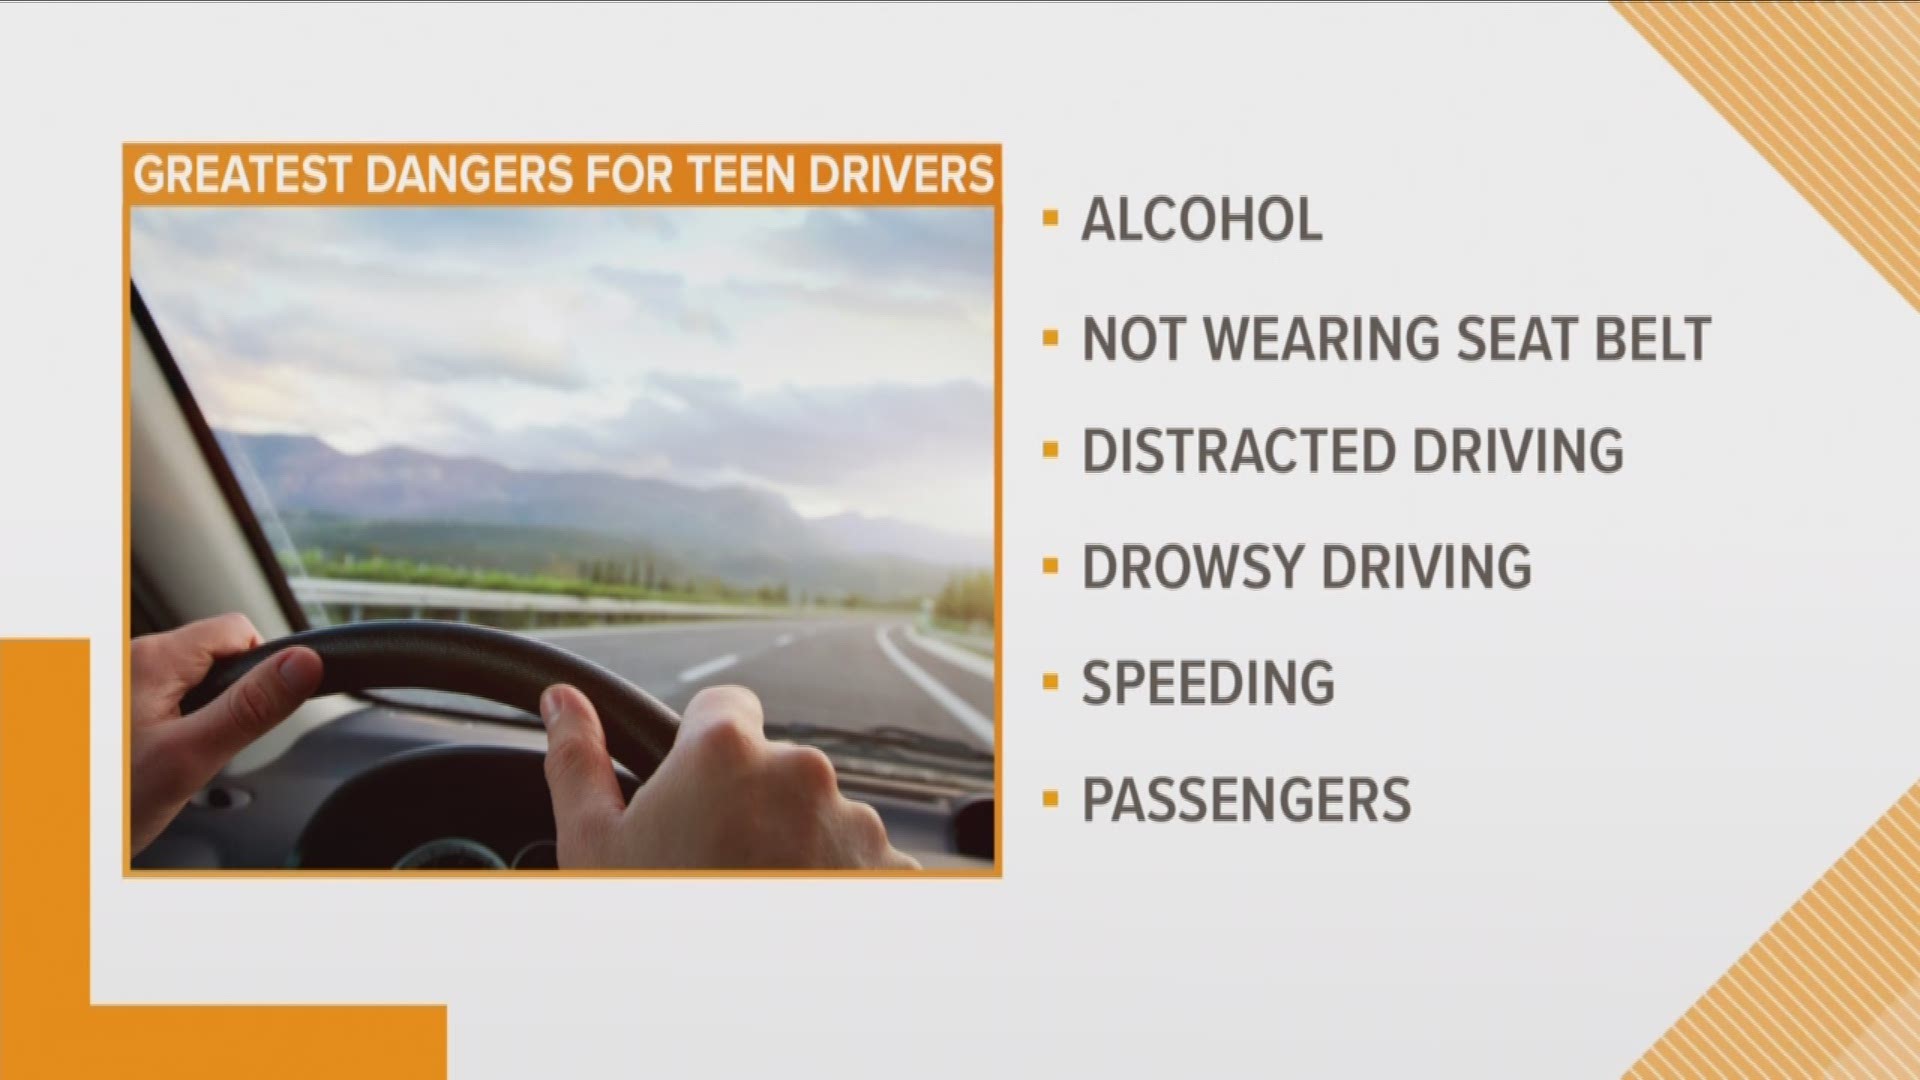 Recognizing National Teen Driver Safety Week